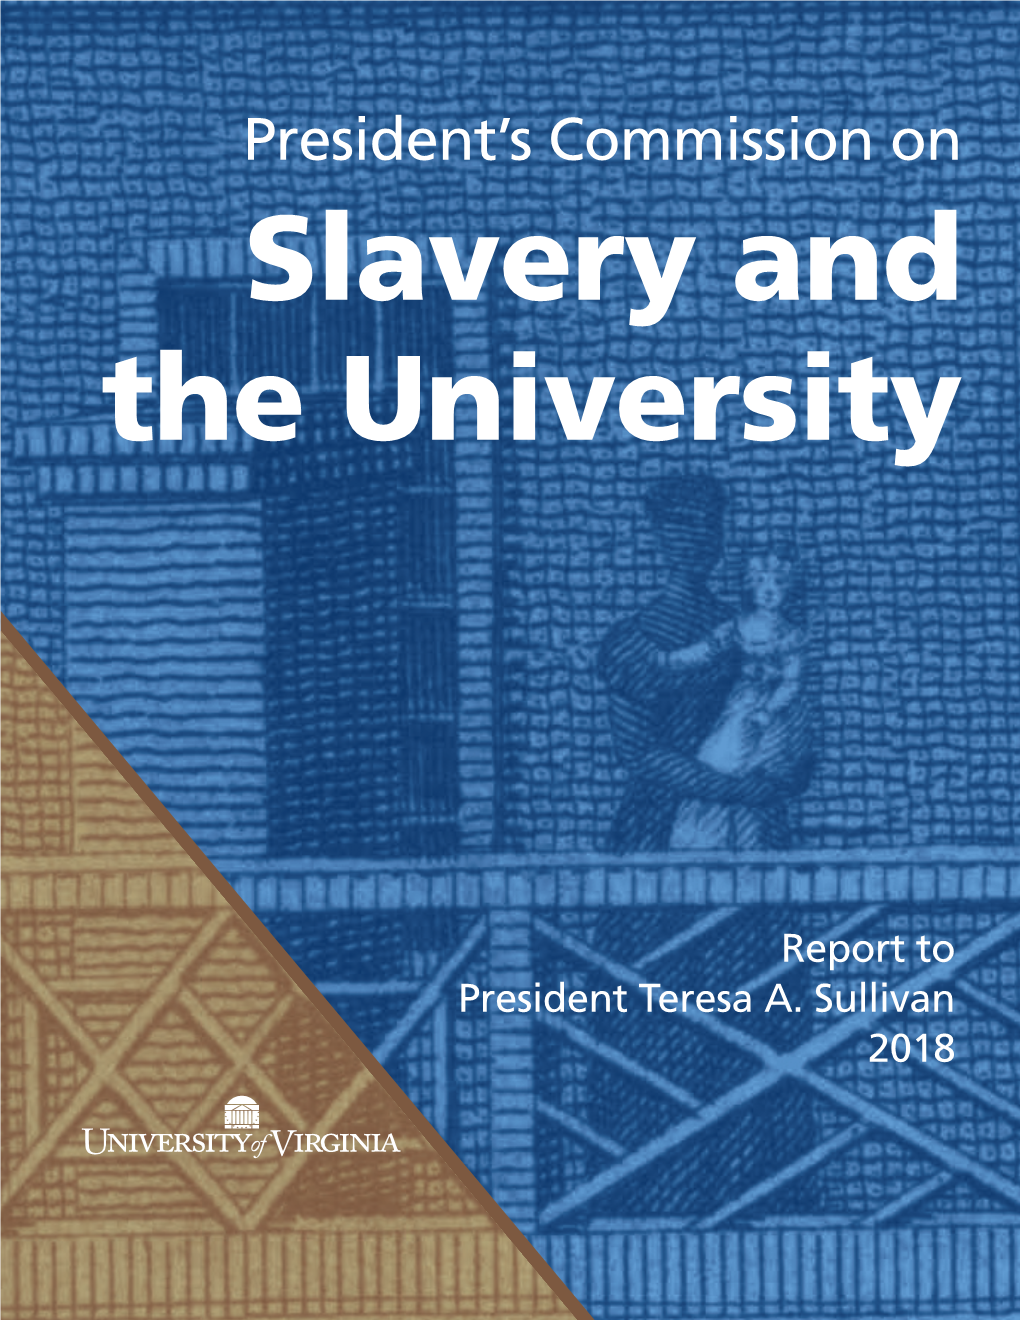 Report of the President's Commission on Slavery and the University